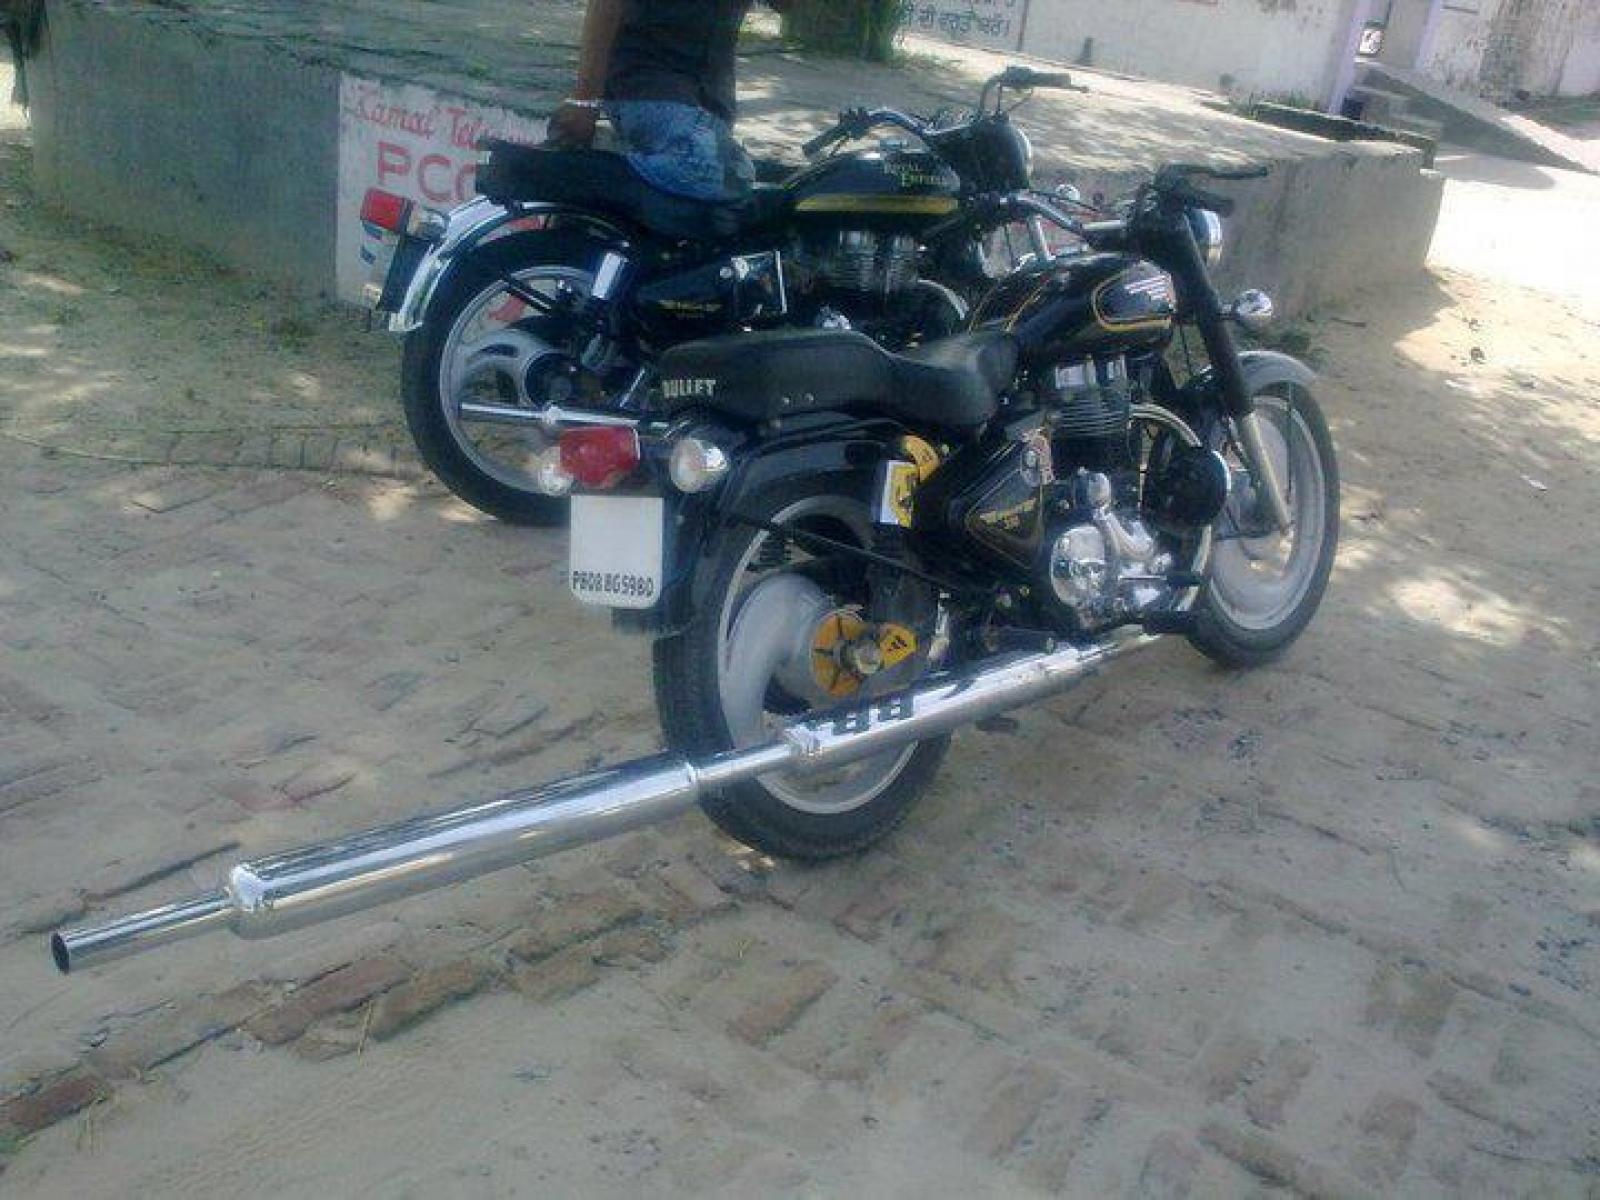 Funny Bike With Long Silencer - Bullet Modified In Punjab - HD Wallpaper 